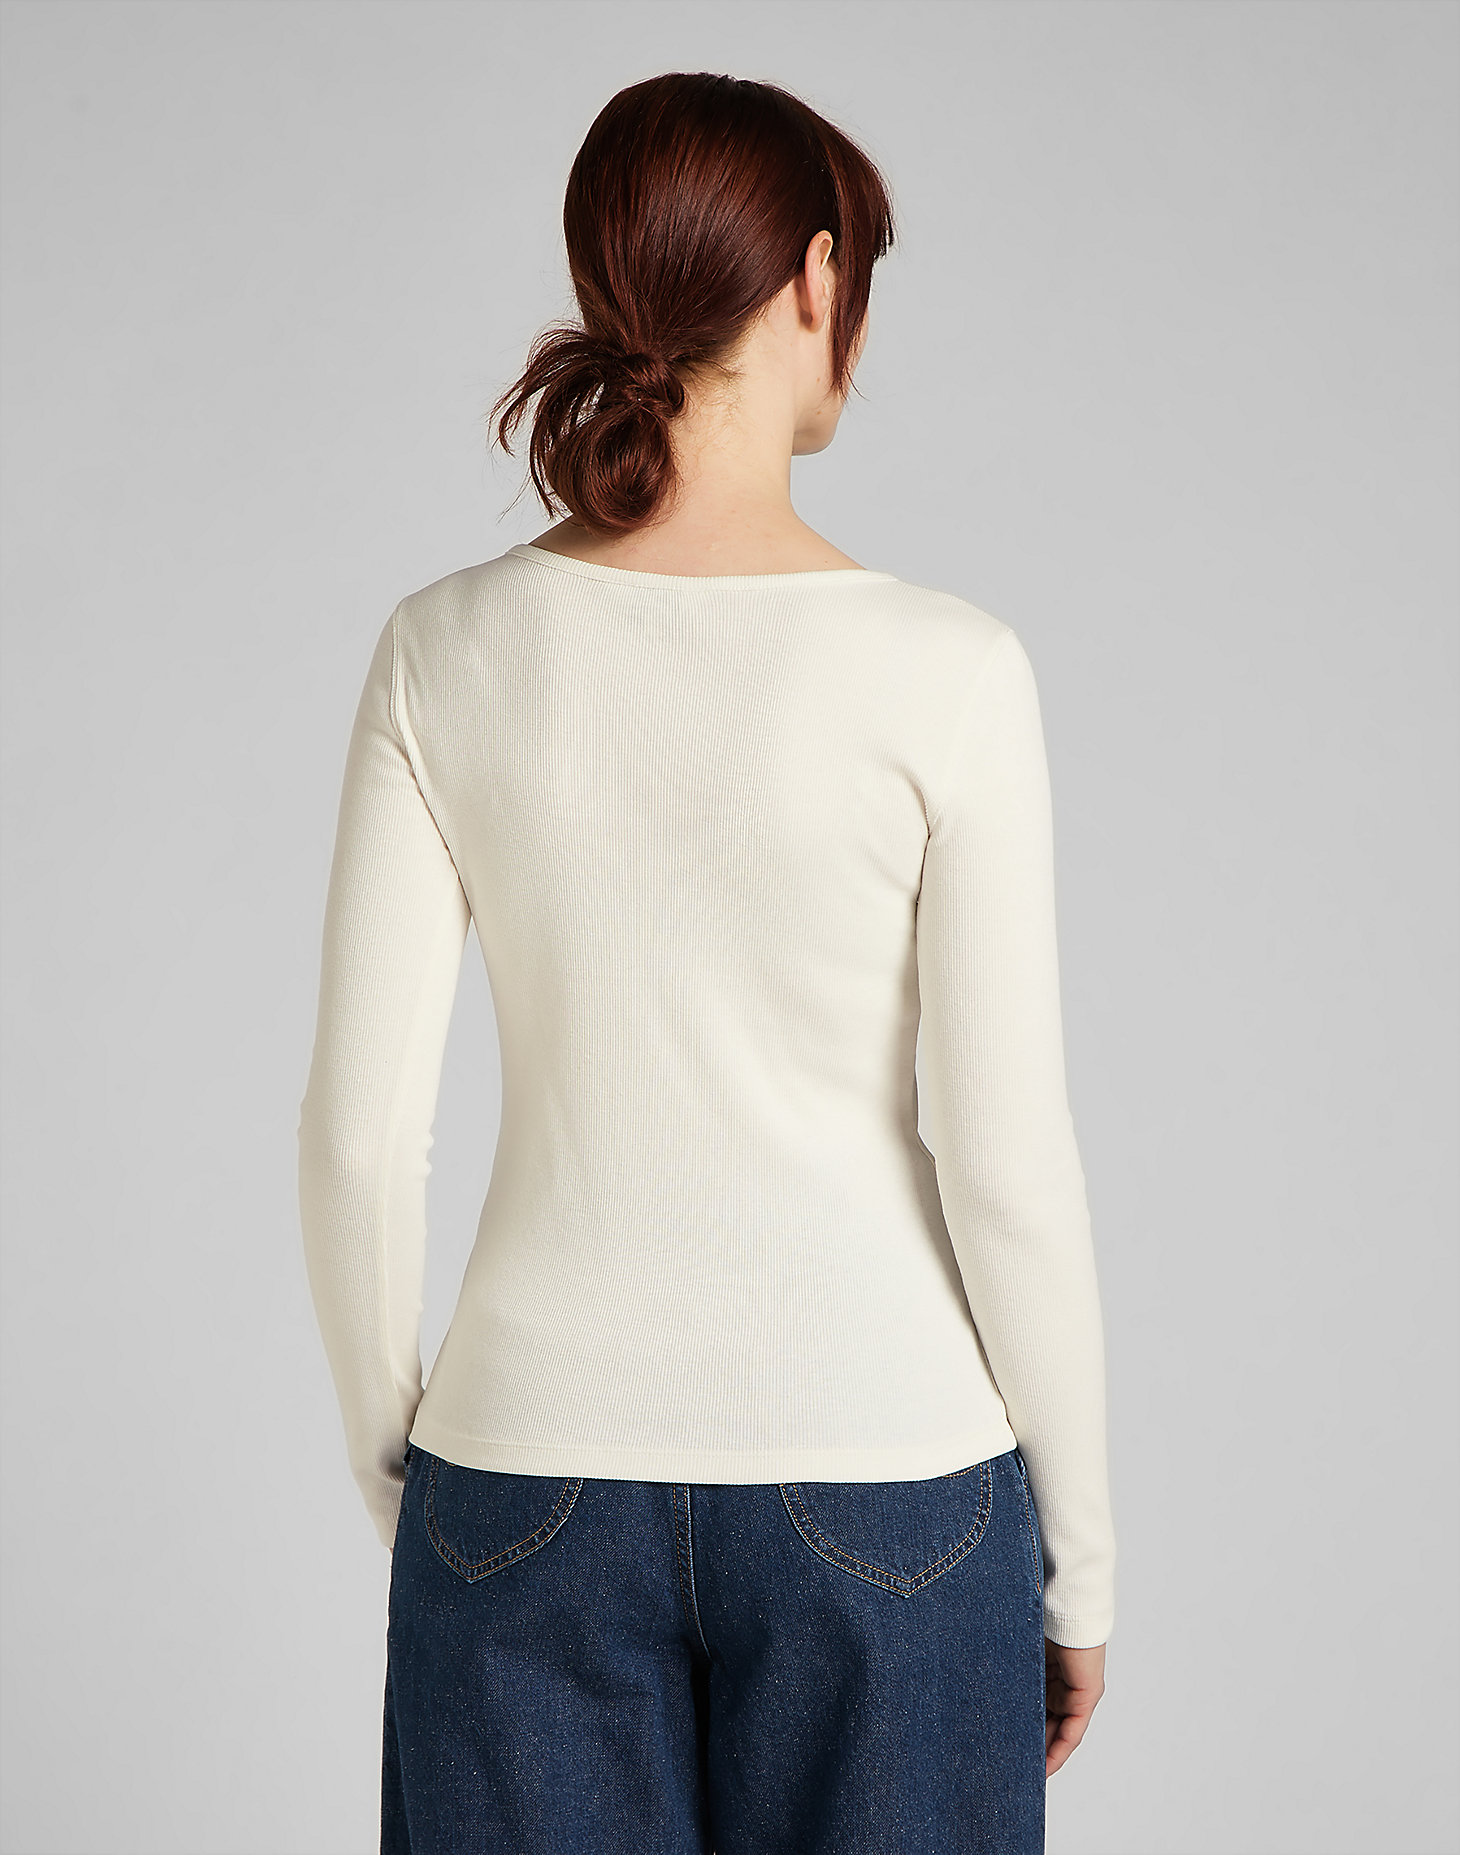 Ribbed Long Sleeve Henley in White Canvas alternative view 1